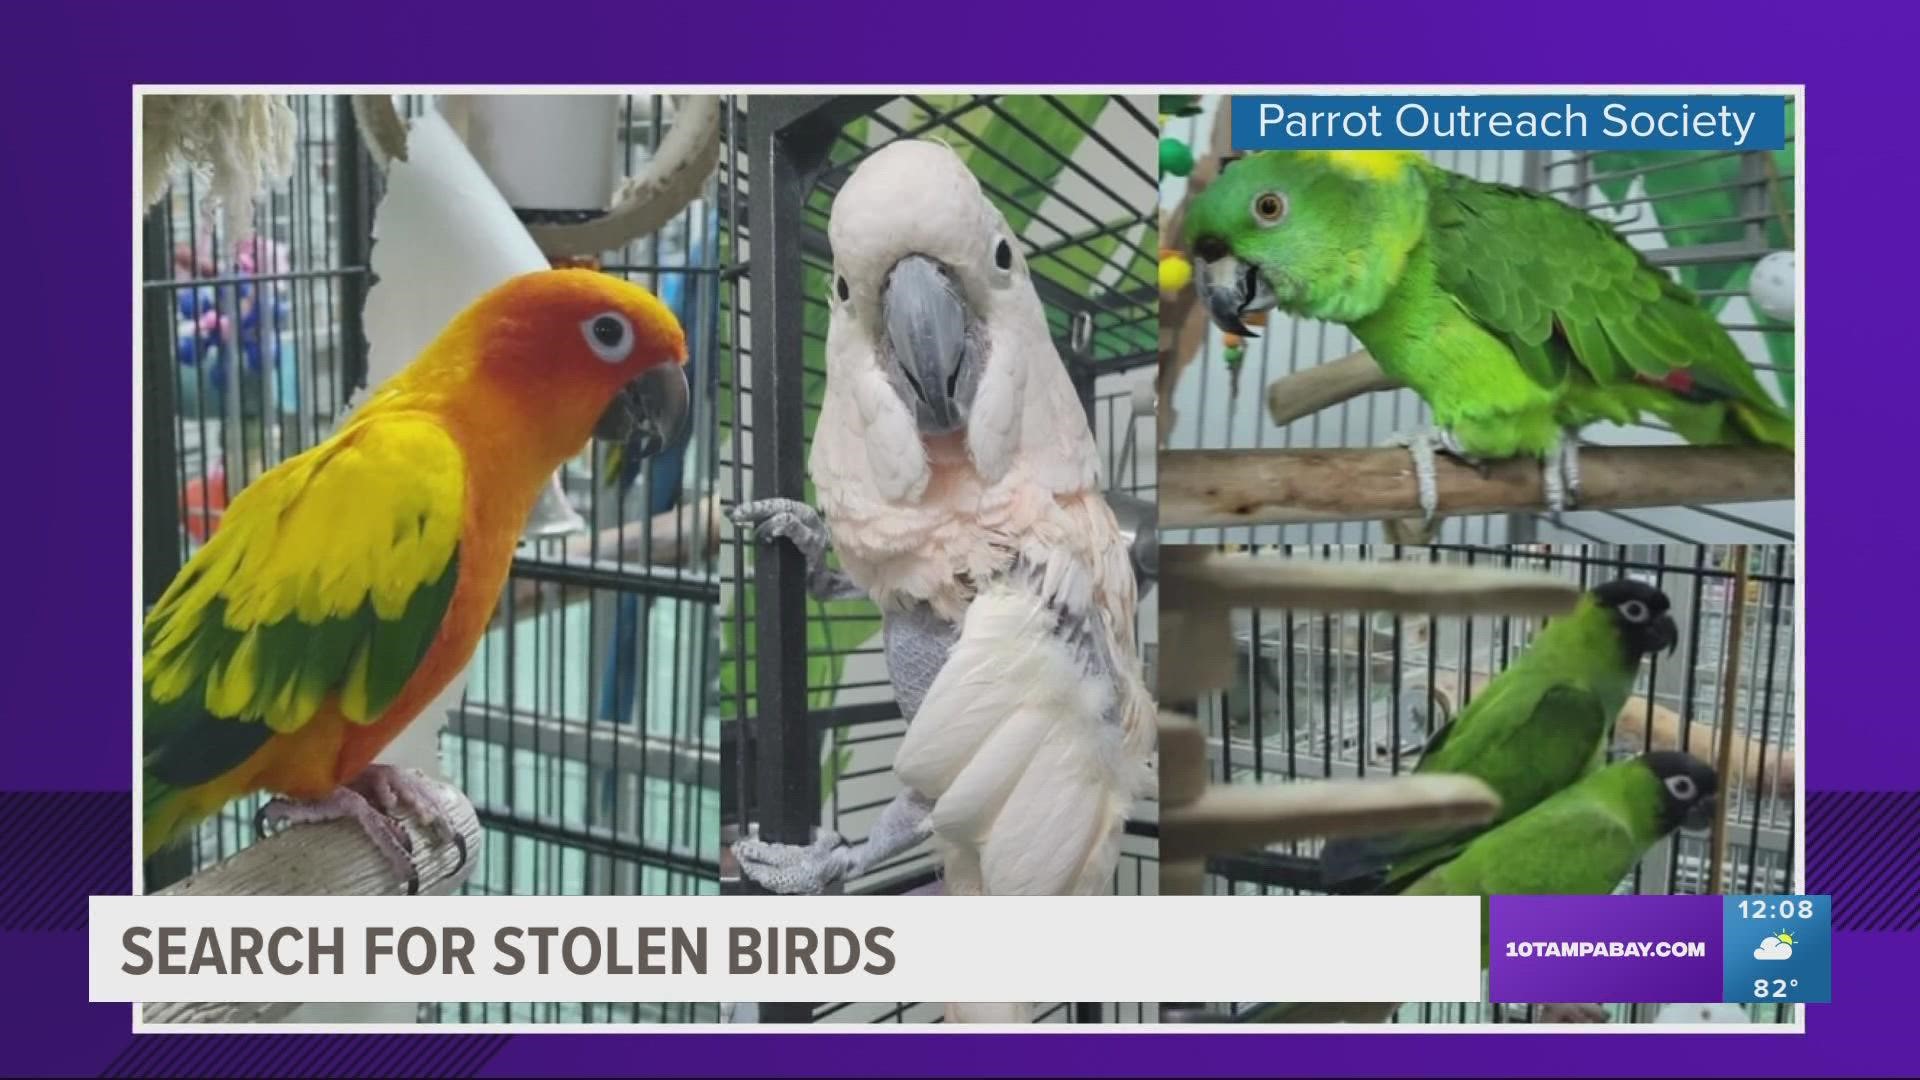 A $20,000 reward is being offered for information that leads to the return of the birds.